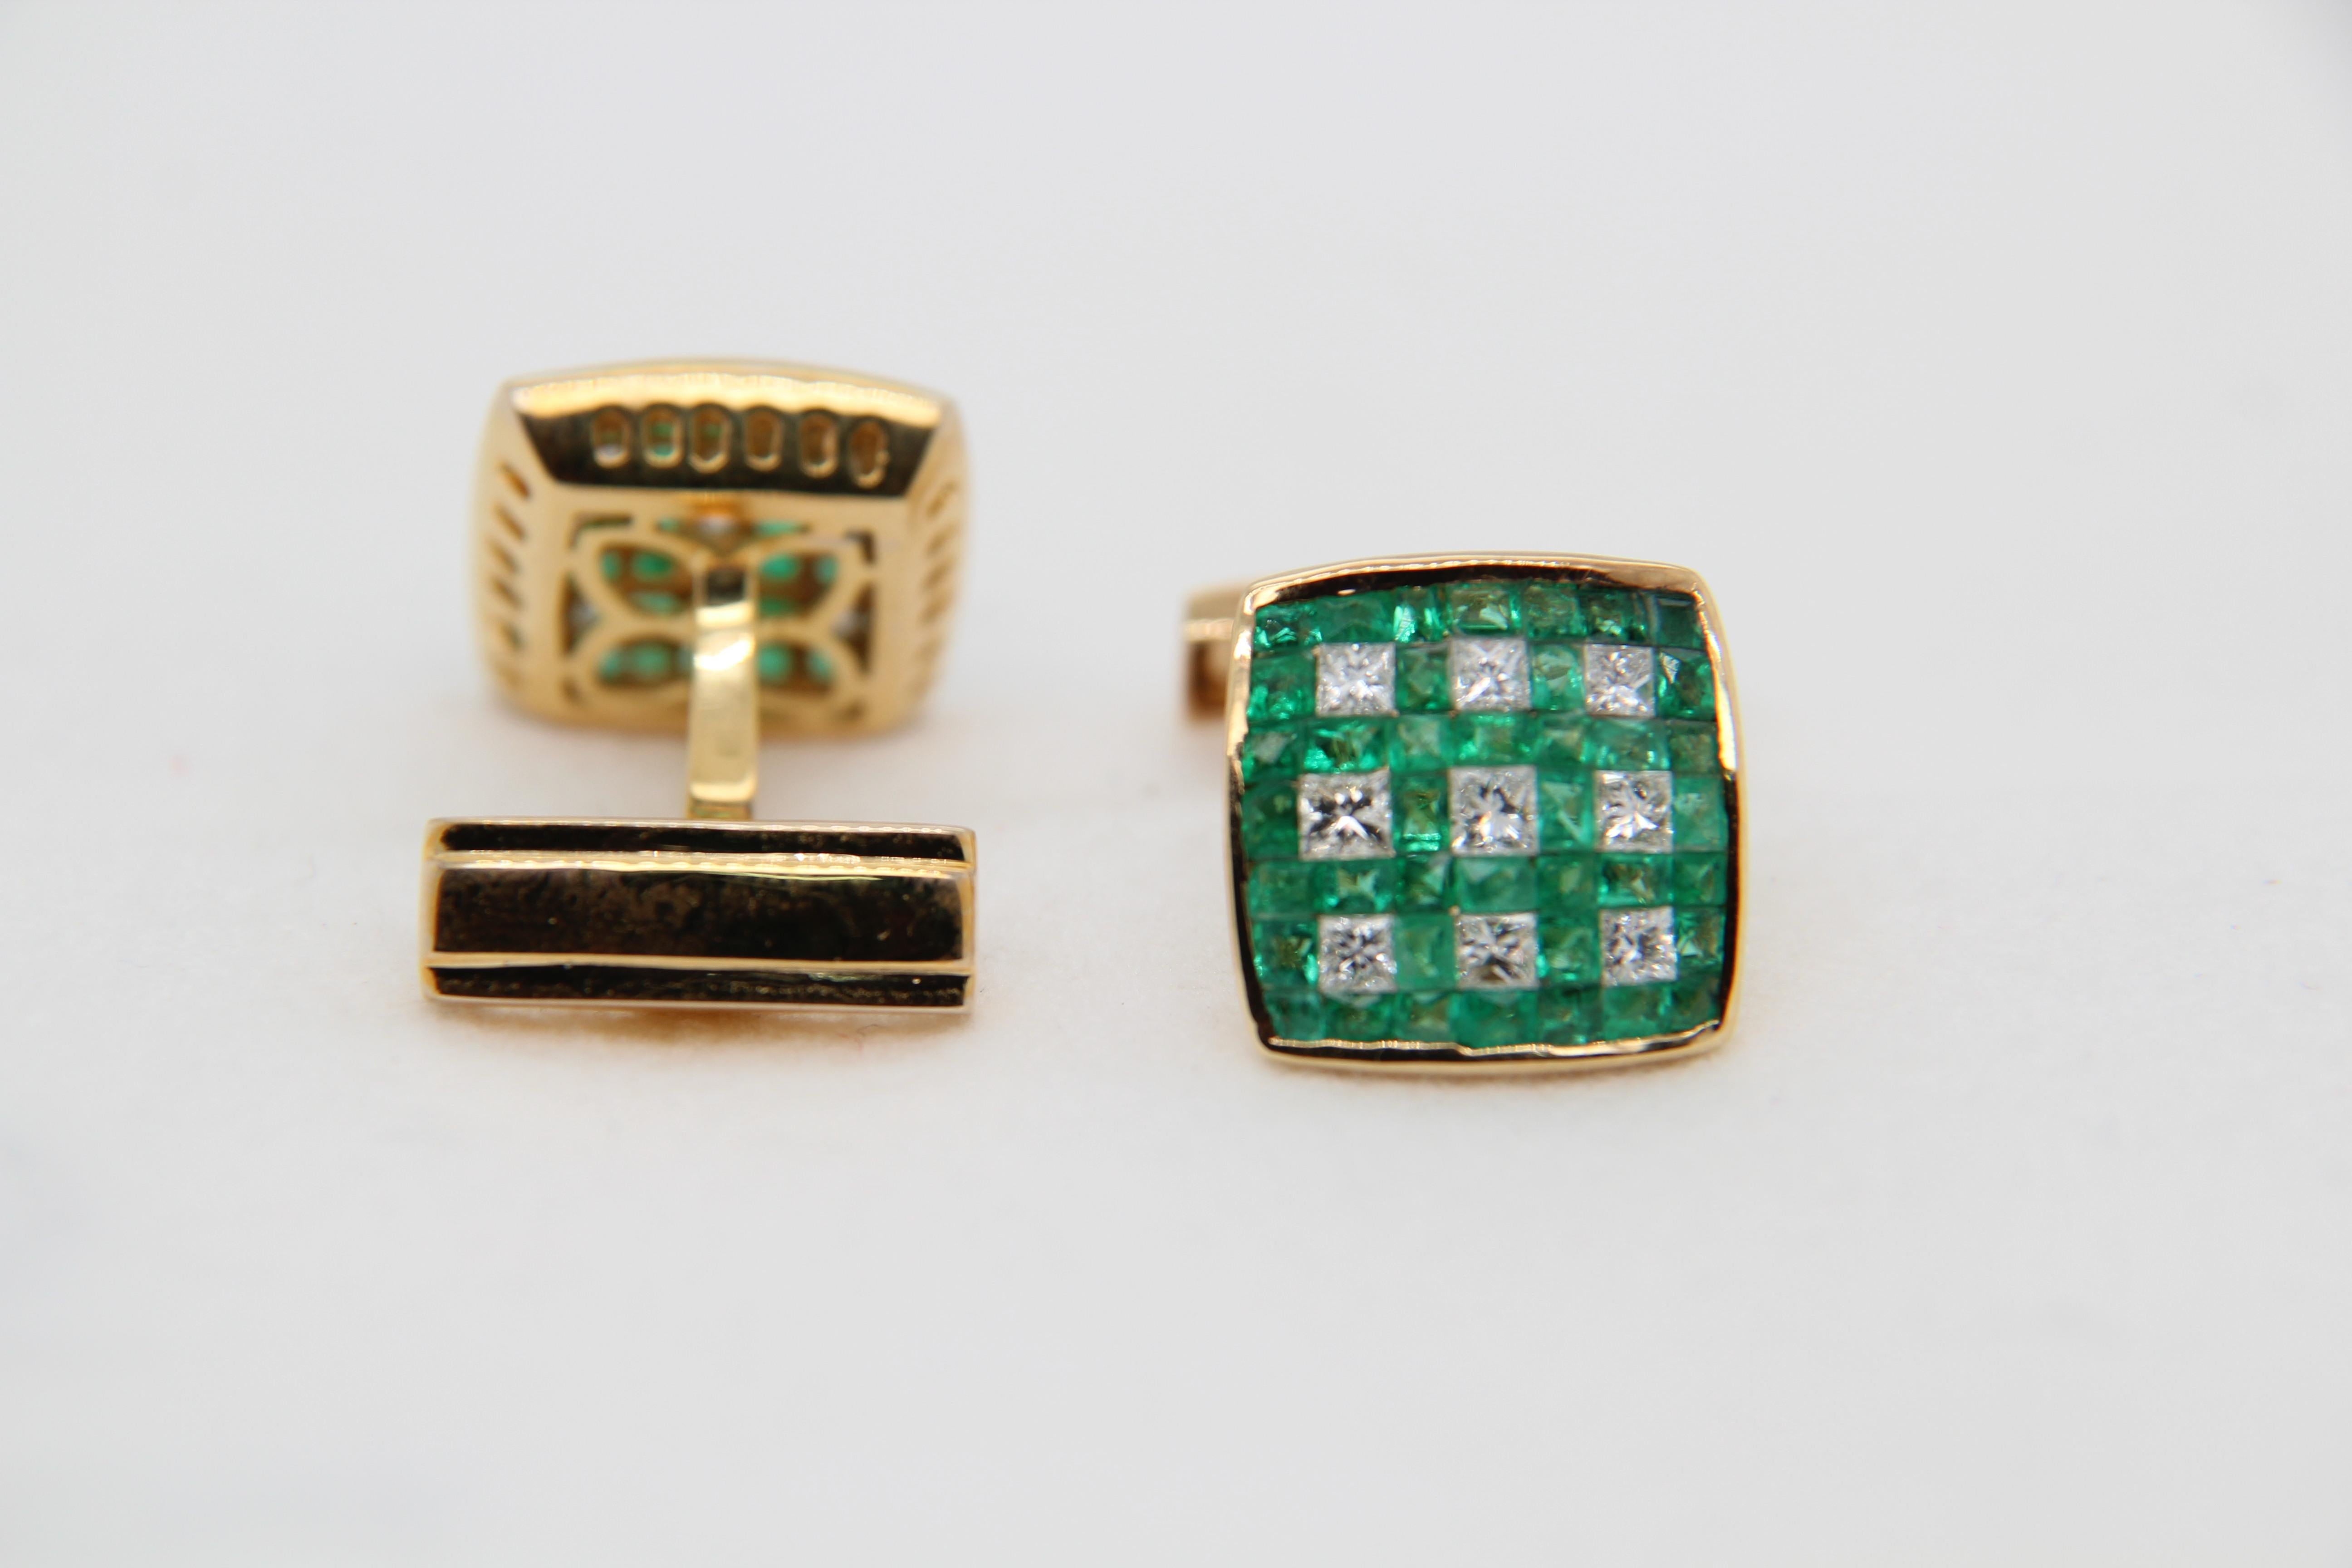 A brand new handcrafted emerald and diamond cufflinks. The total emerald weight is 4.36 carats, diamond weight is 1.56 carats and gross weight is 10.14 grams. This is the large size, there is also another smaller size available. The cufflinks height